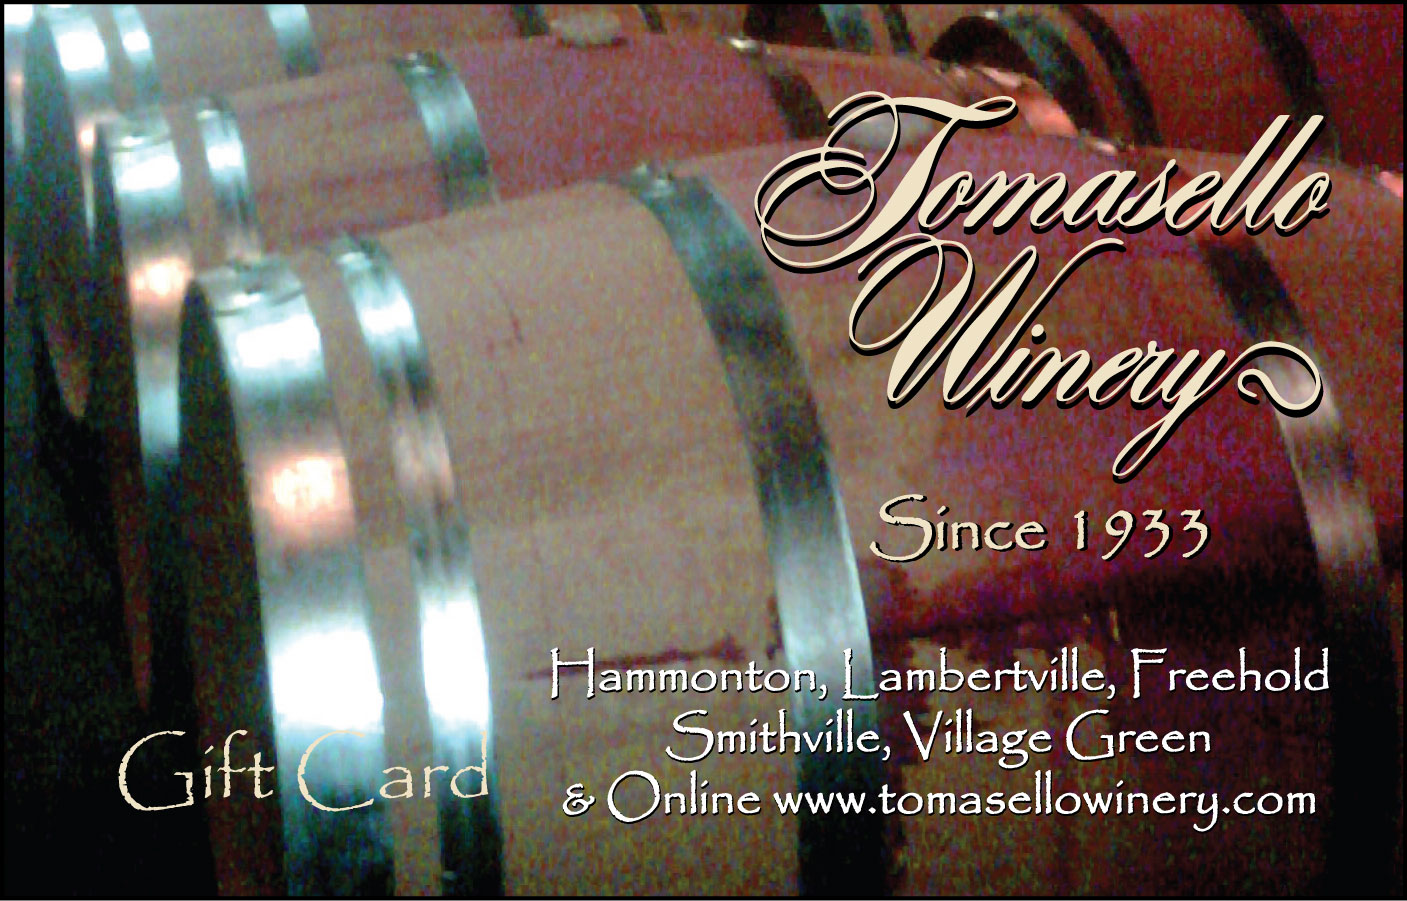 Product Image for Tomasello Winery $100.00 Gift Certificate